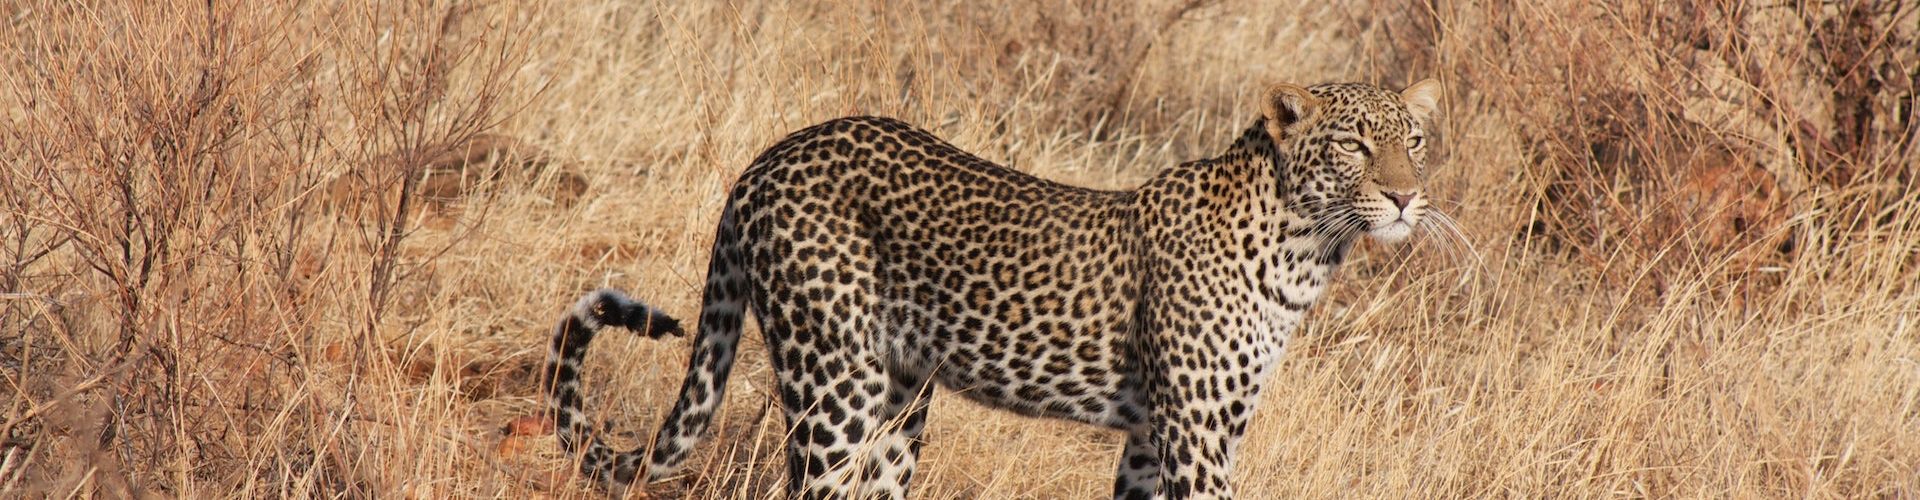 A leopard in Selous Game Reserve